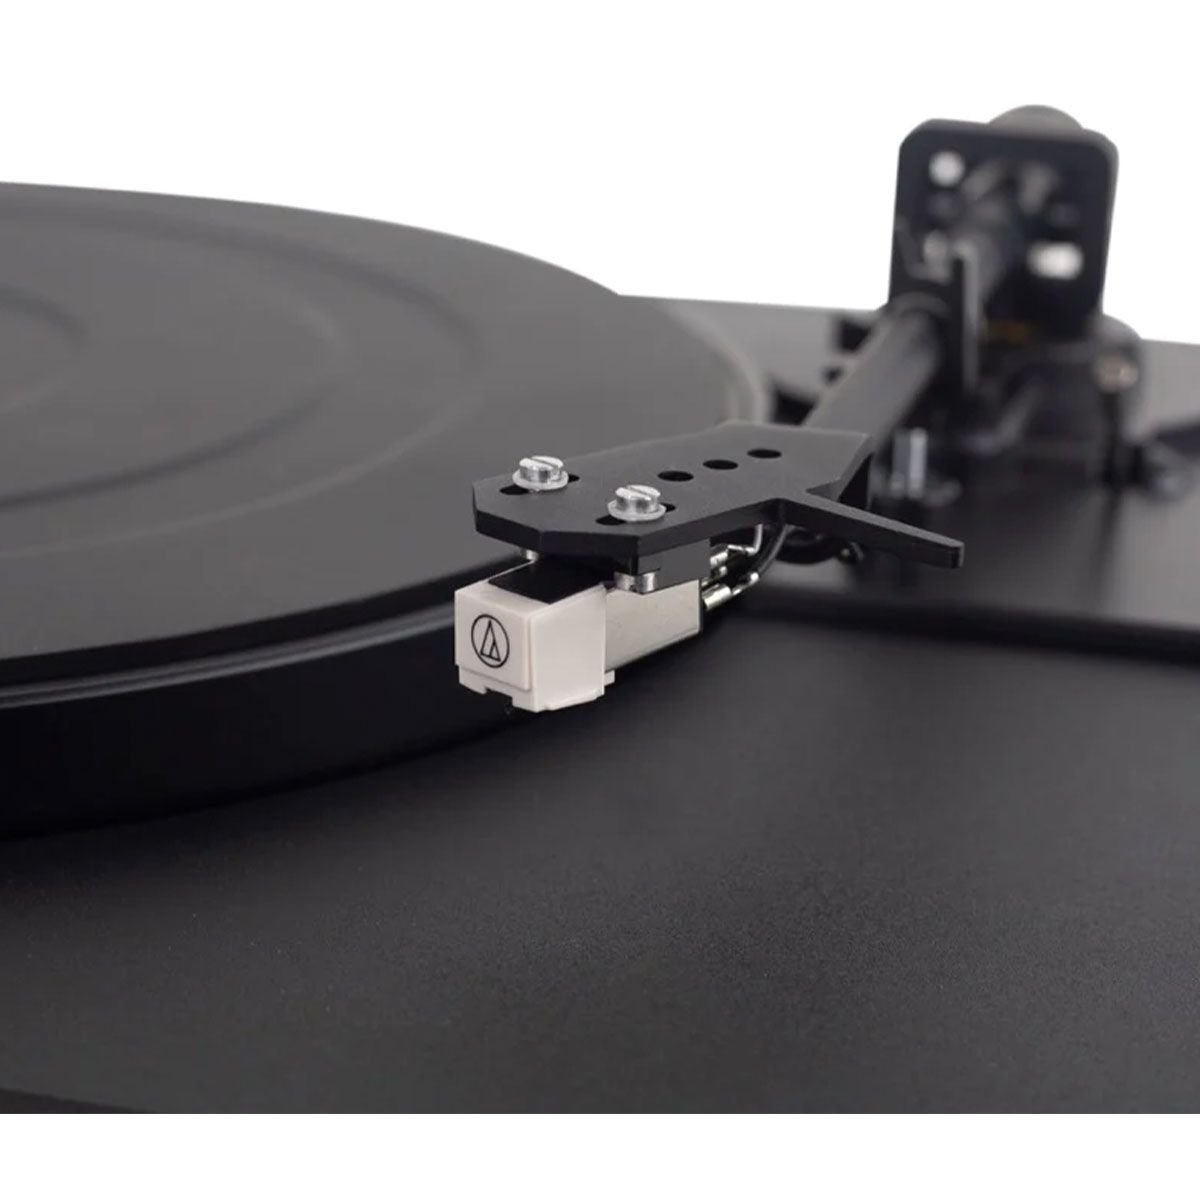 Andover Audio SpinDeck 2 Semi-Automatic Turntable - black with no dustcover - zoomed tonearm view